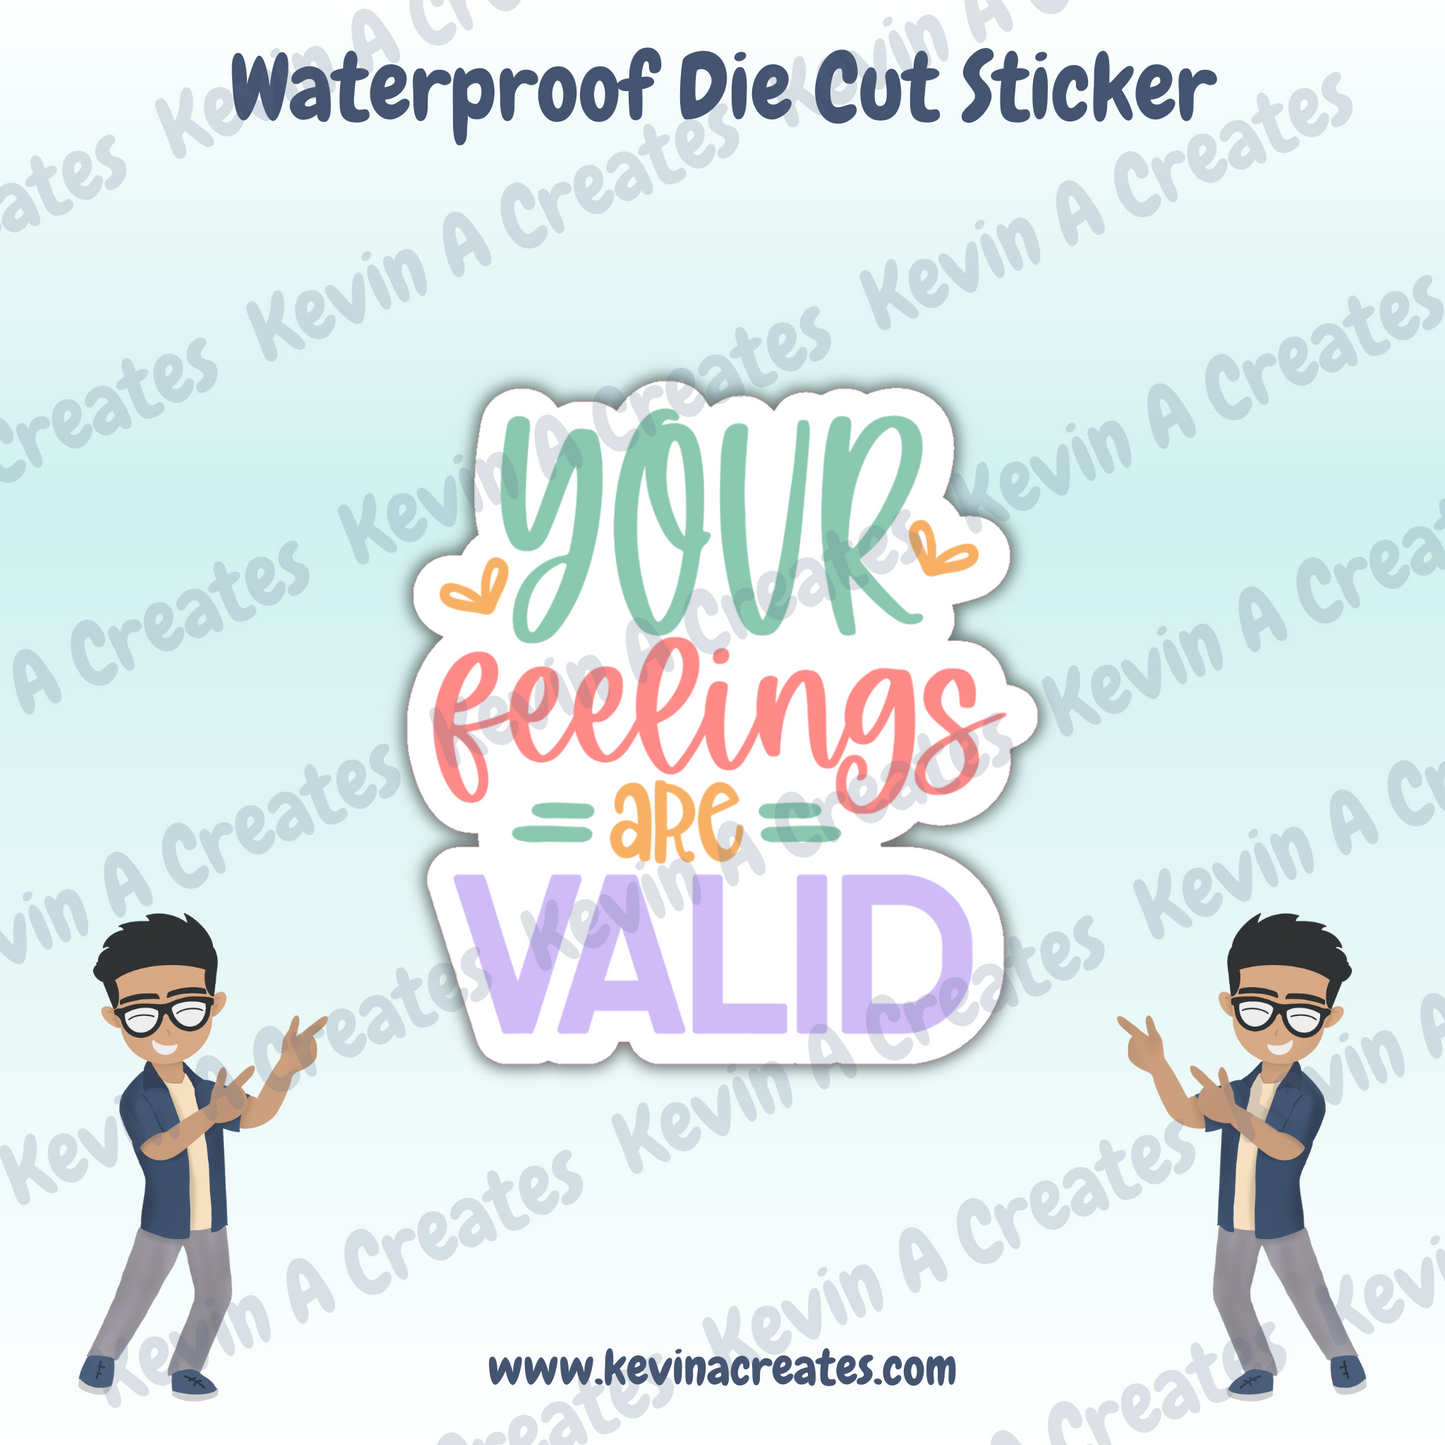 DC-078, Your Feelings are Valid Die Cut Stickers